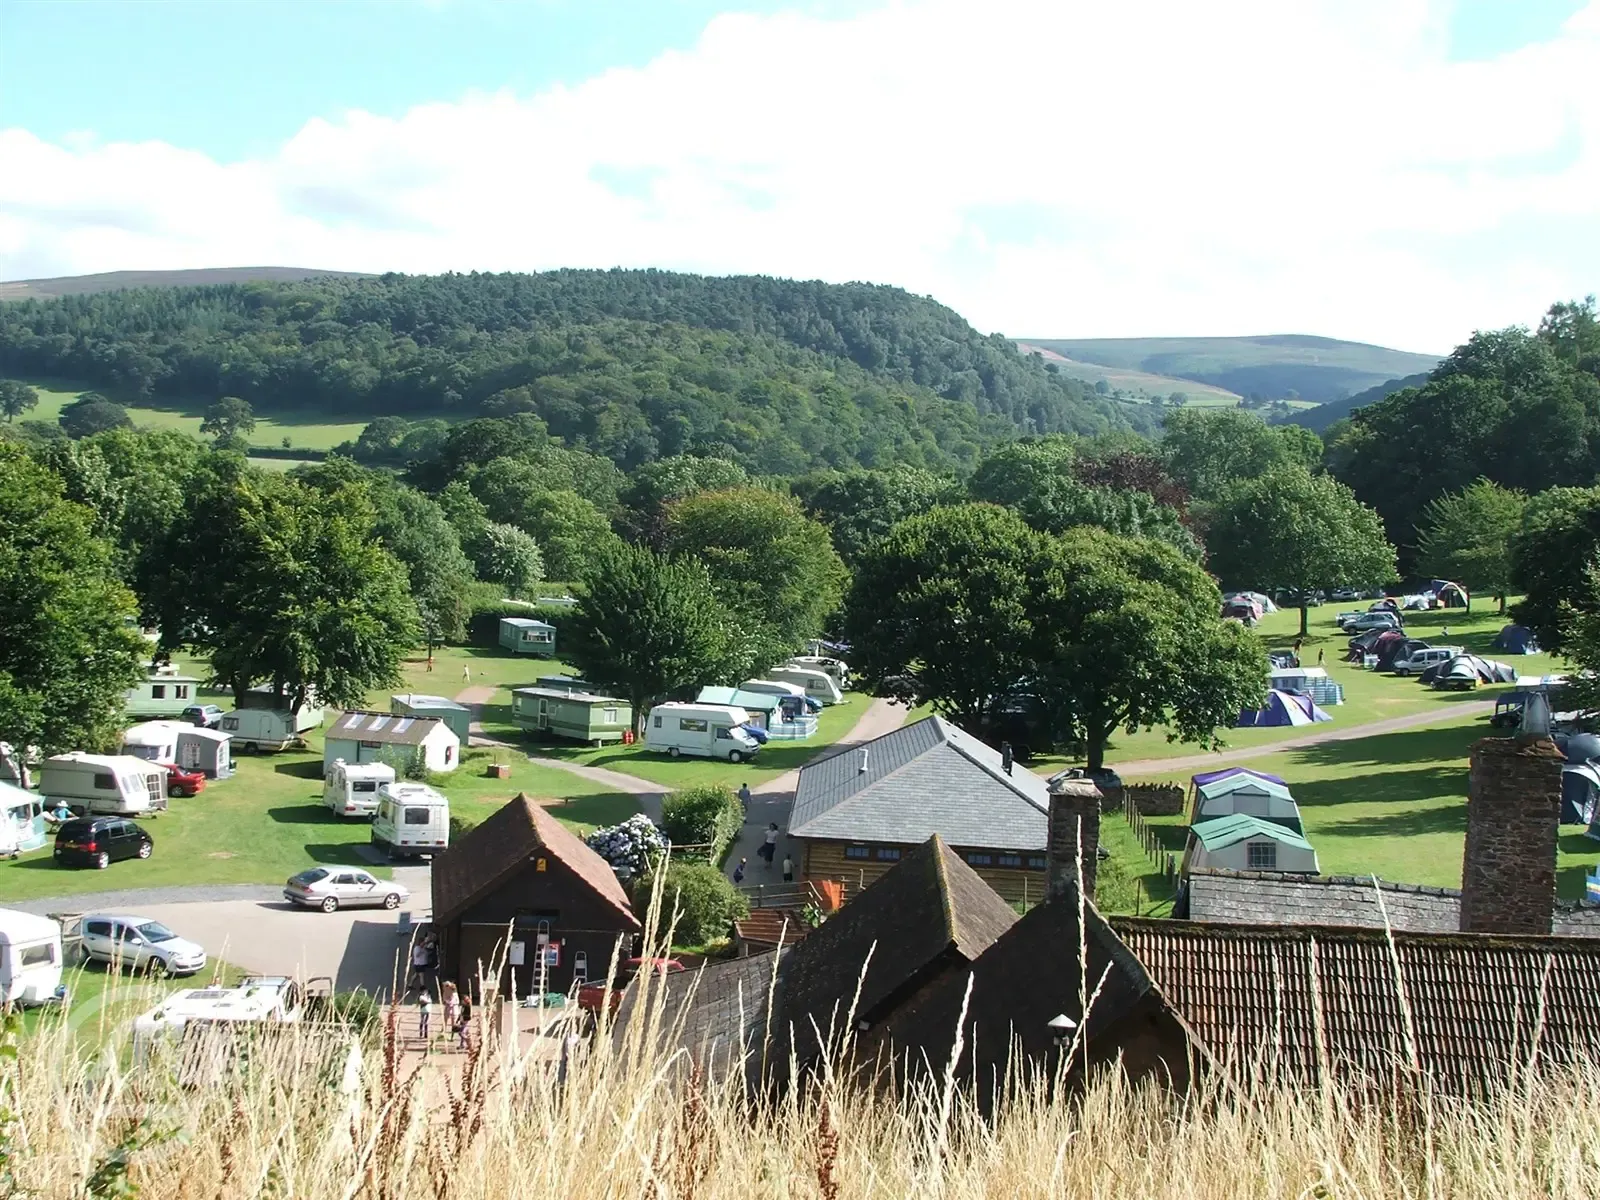 View of Burrowhayes Farm Caravan and Camping Site